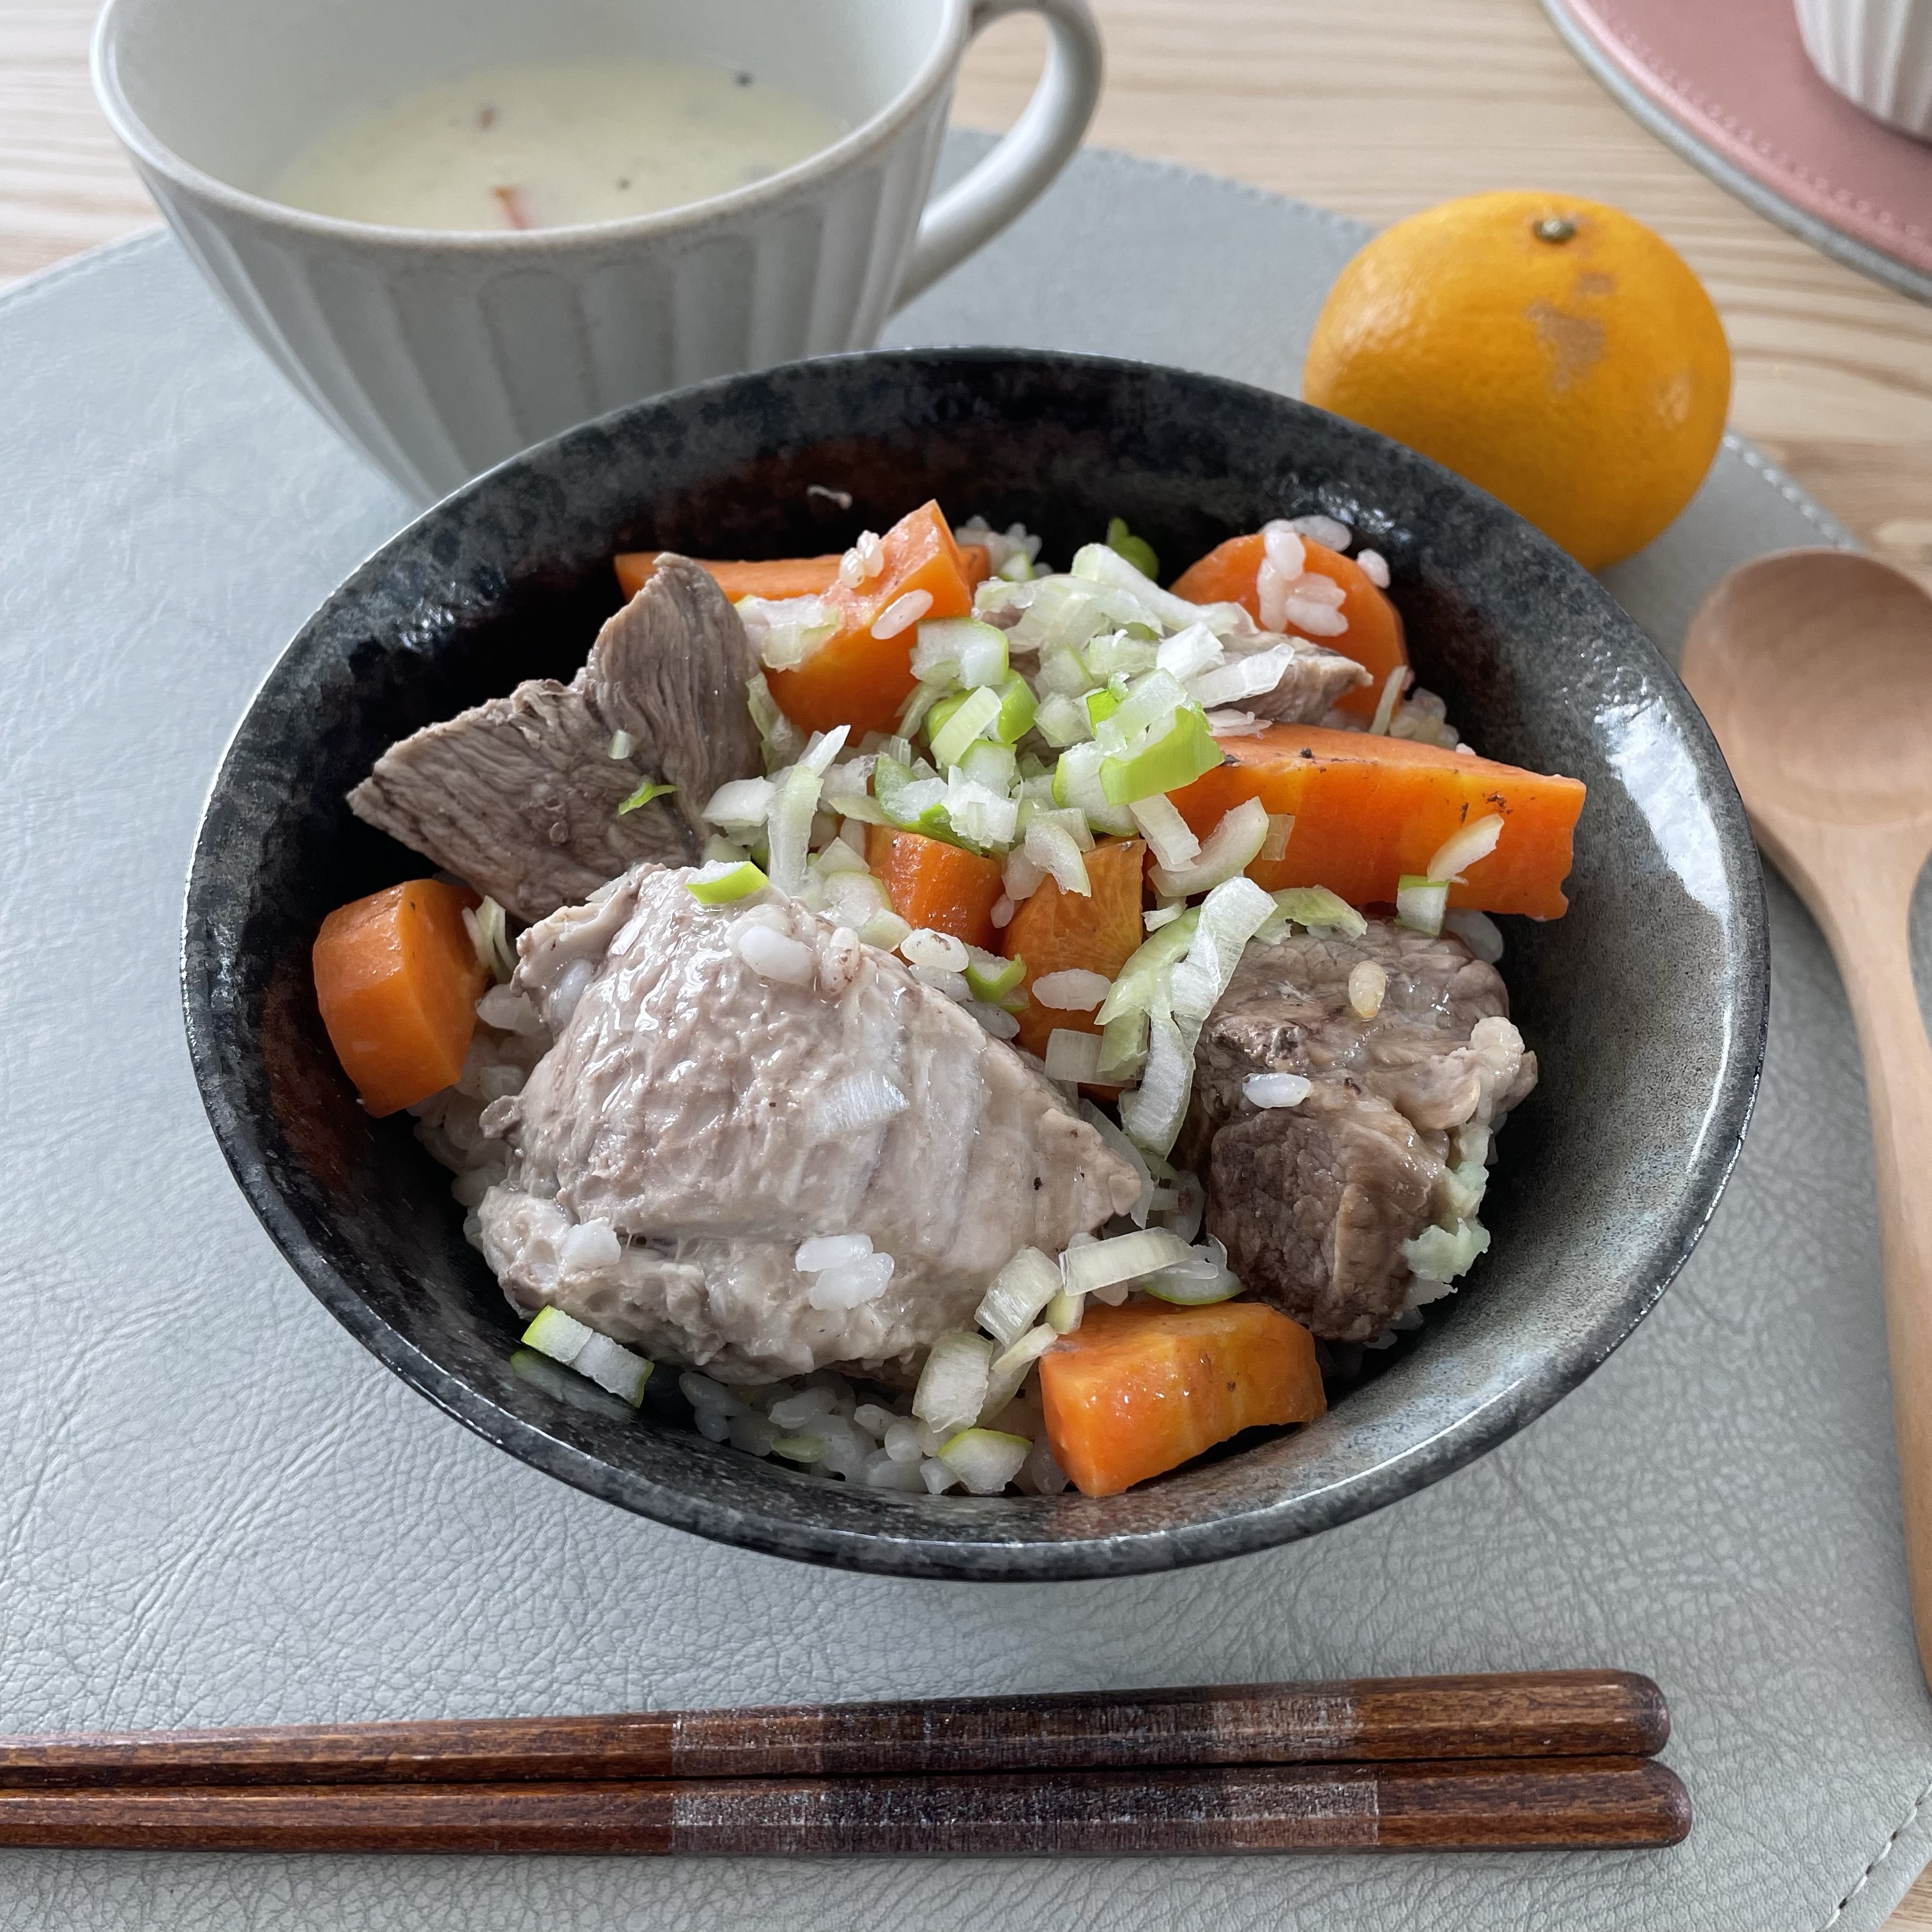 Pork and rice cooked in a pressure cooker together